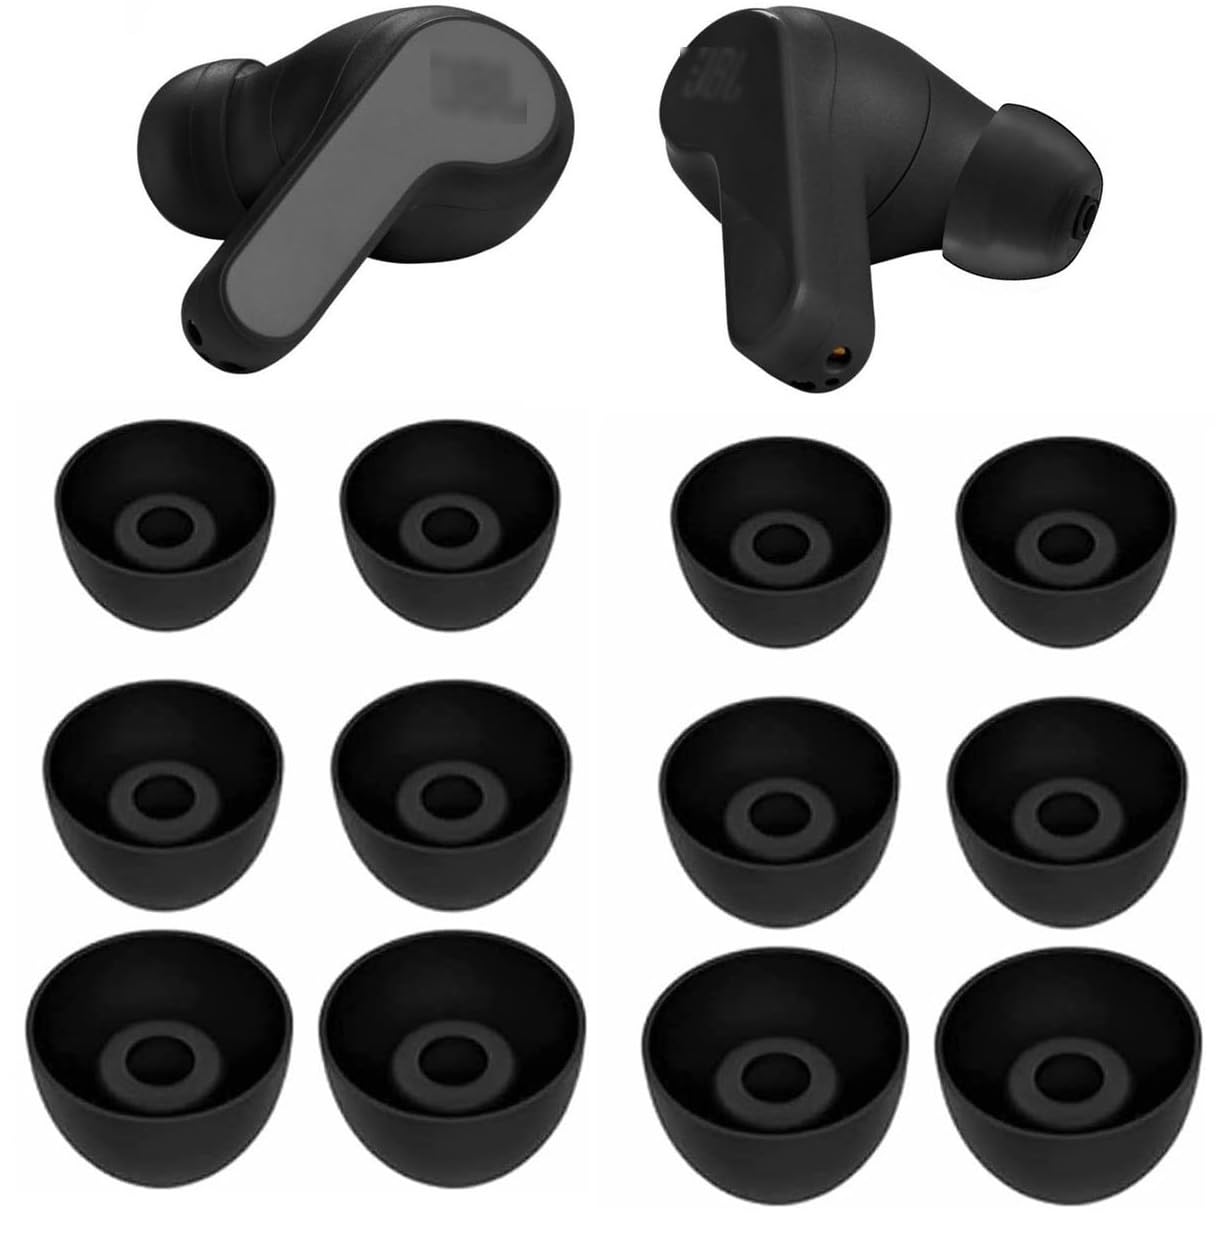 Replacement Ear Tips Eartips Ear Plug Ear Gels Compatible with JBL Vibe 200TWS Earbuds,JNSA Silicone Ear Tip Replacement for JBL Vibe 200TWS,S/M/L 6 Pairs,Black 532